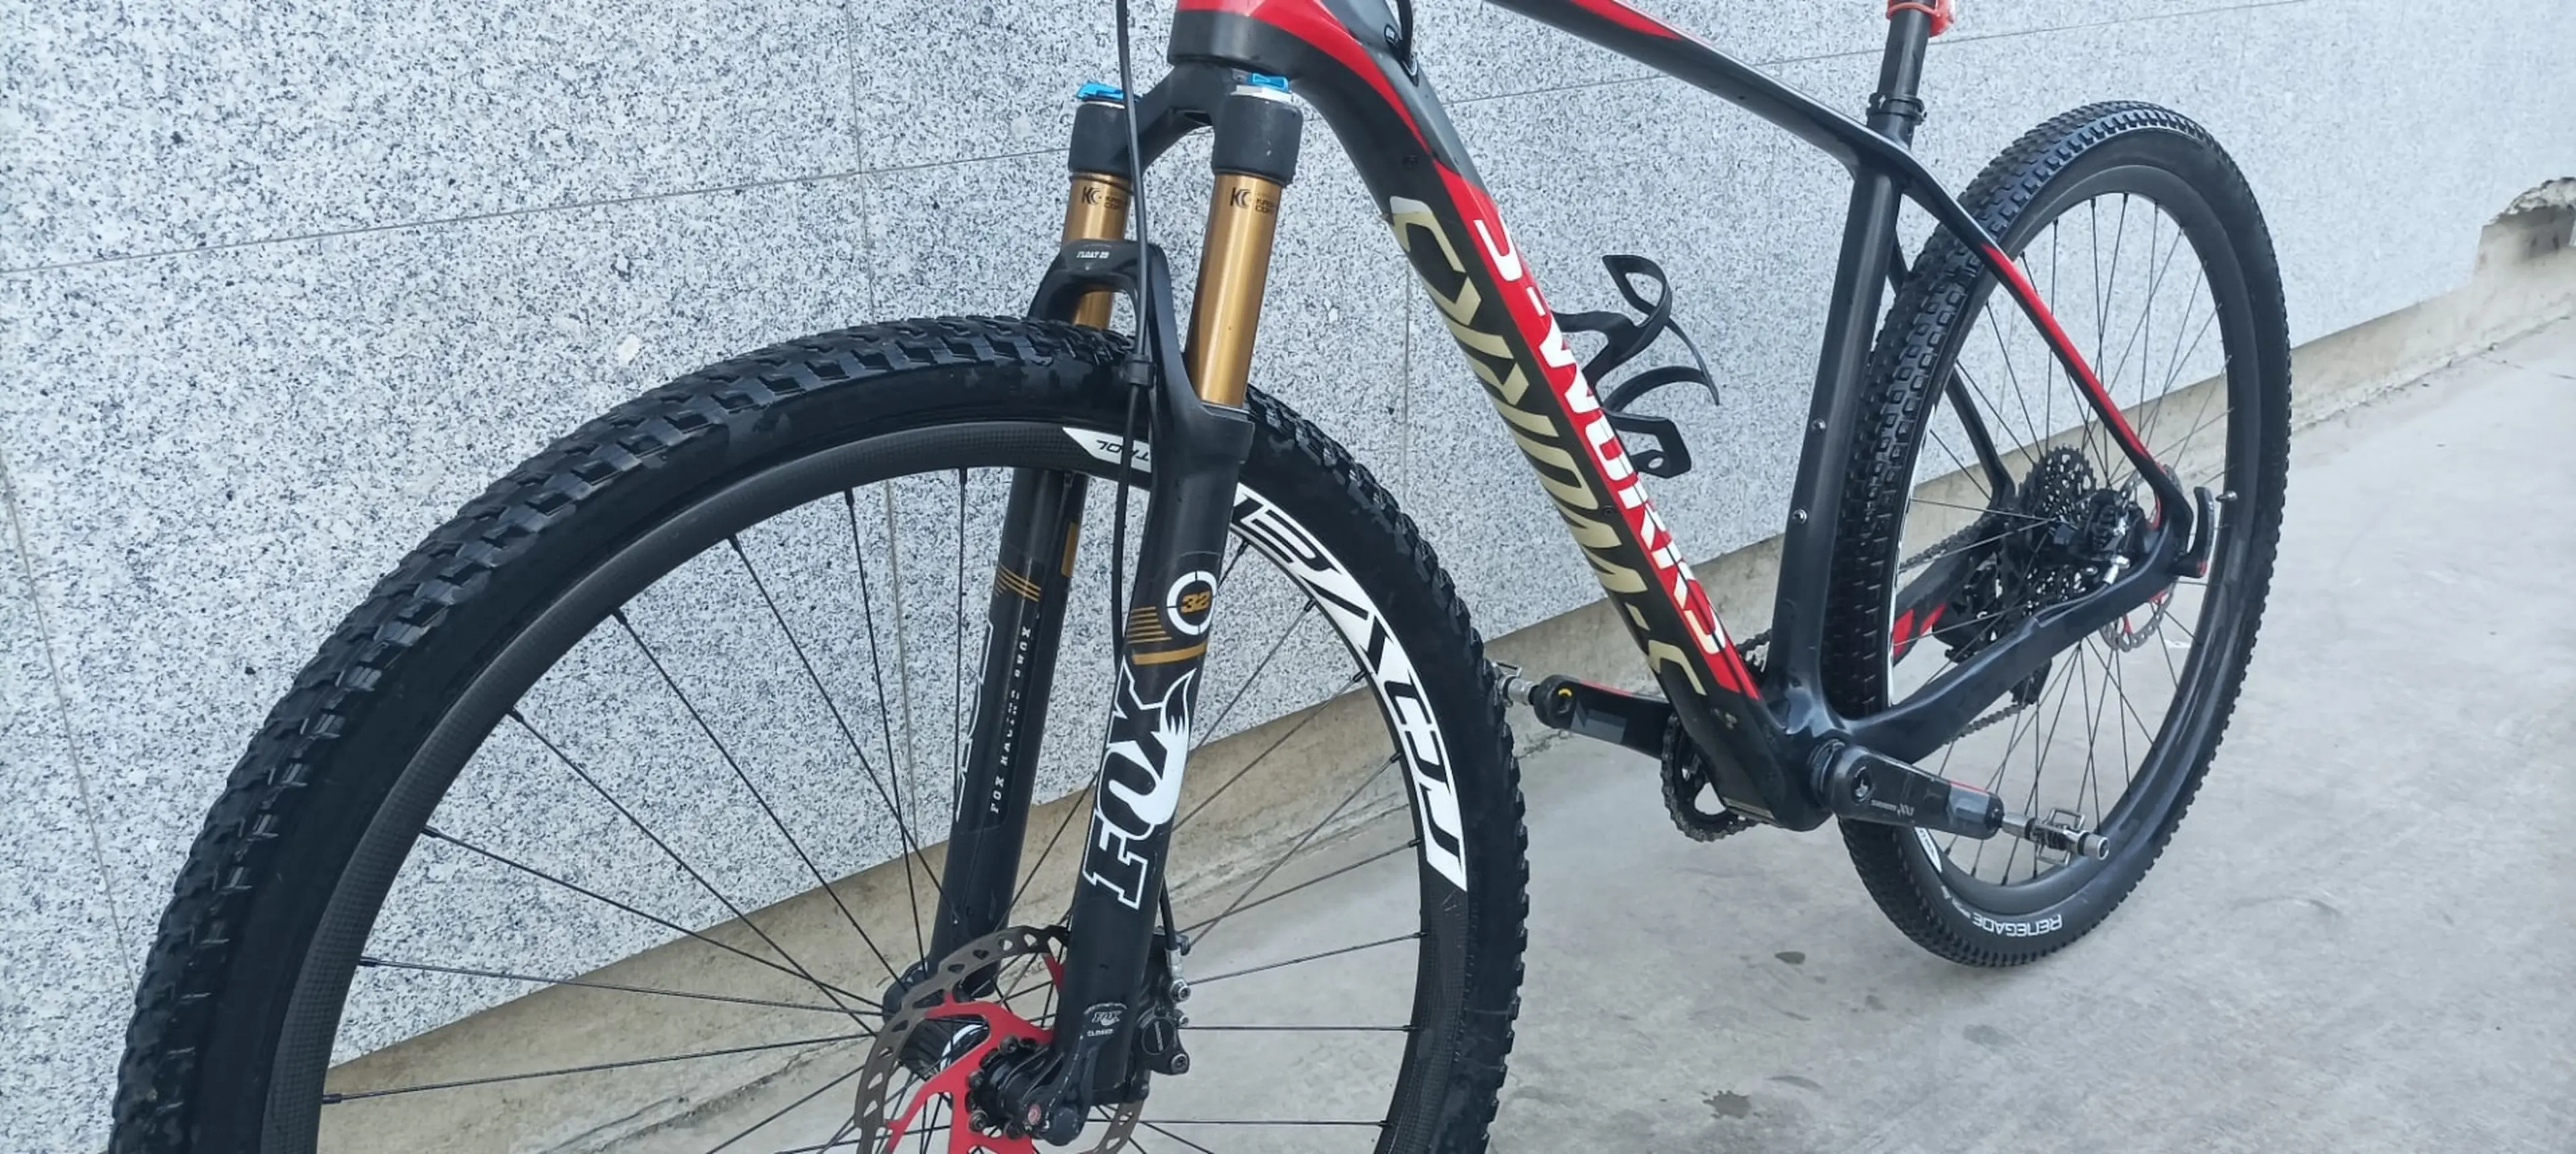 1. Specialized stumpjumper S-Works